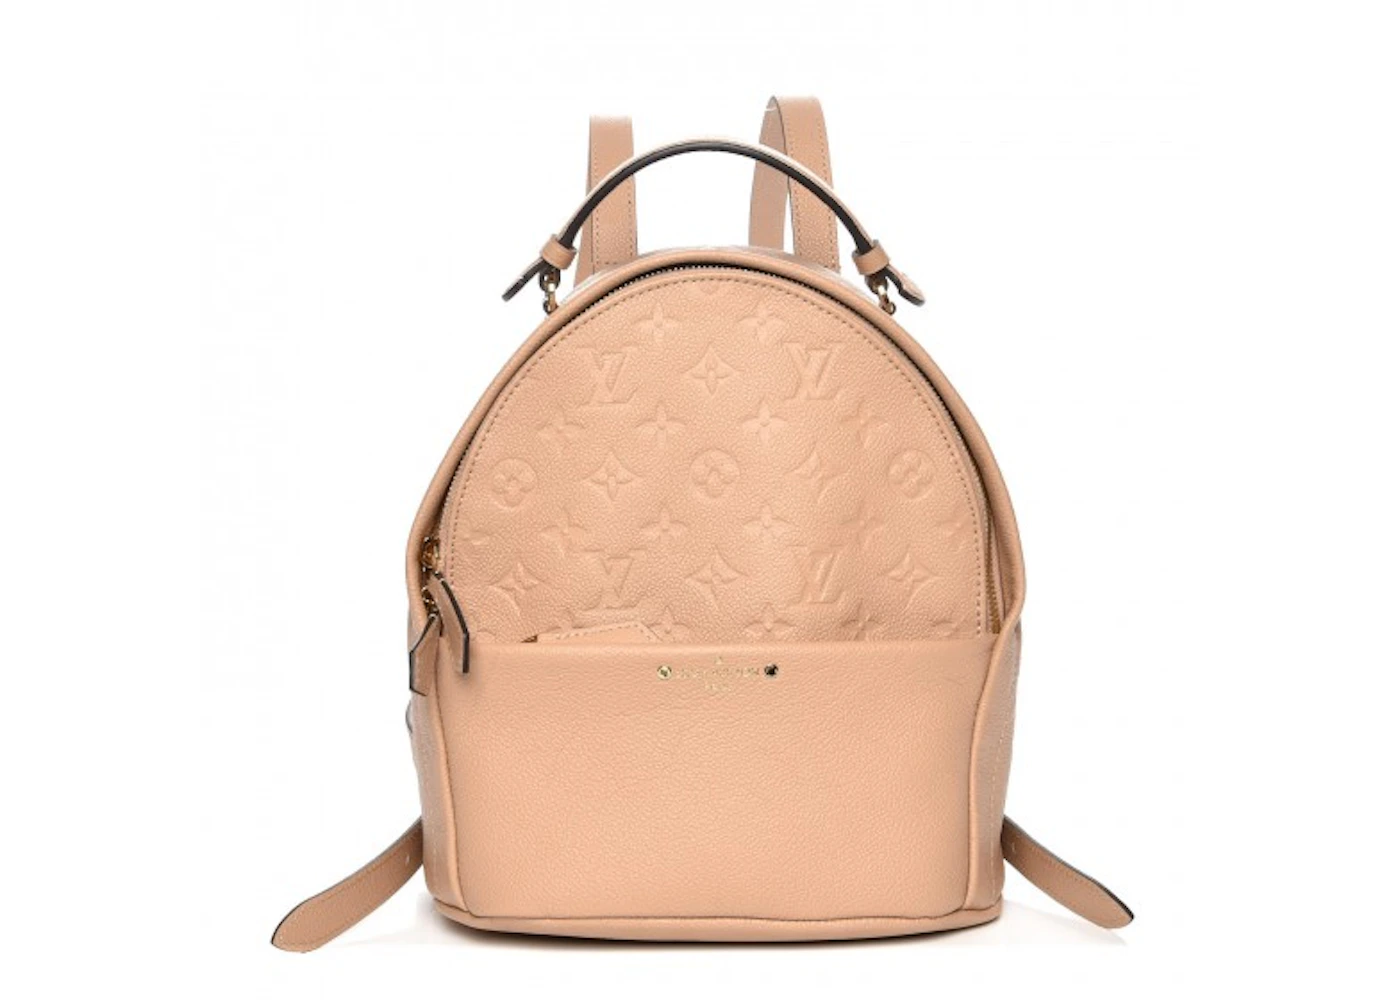 louis vuitton backpack limited edition